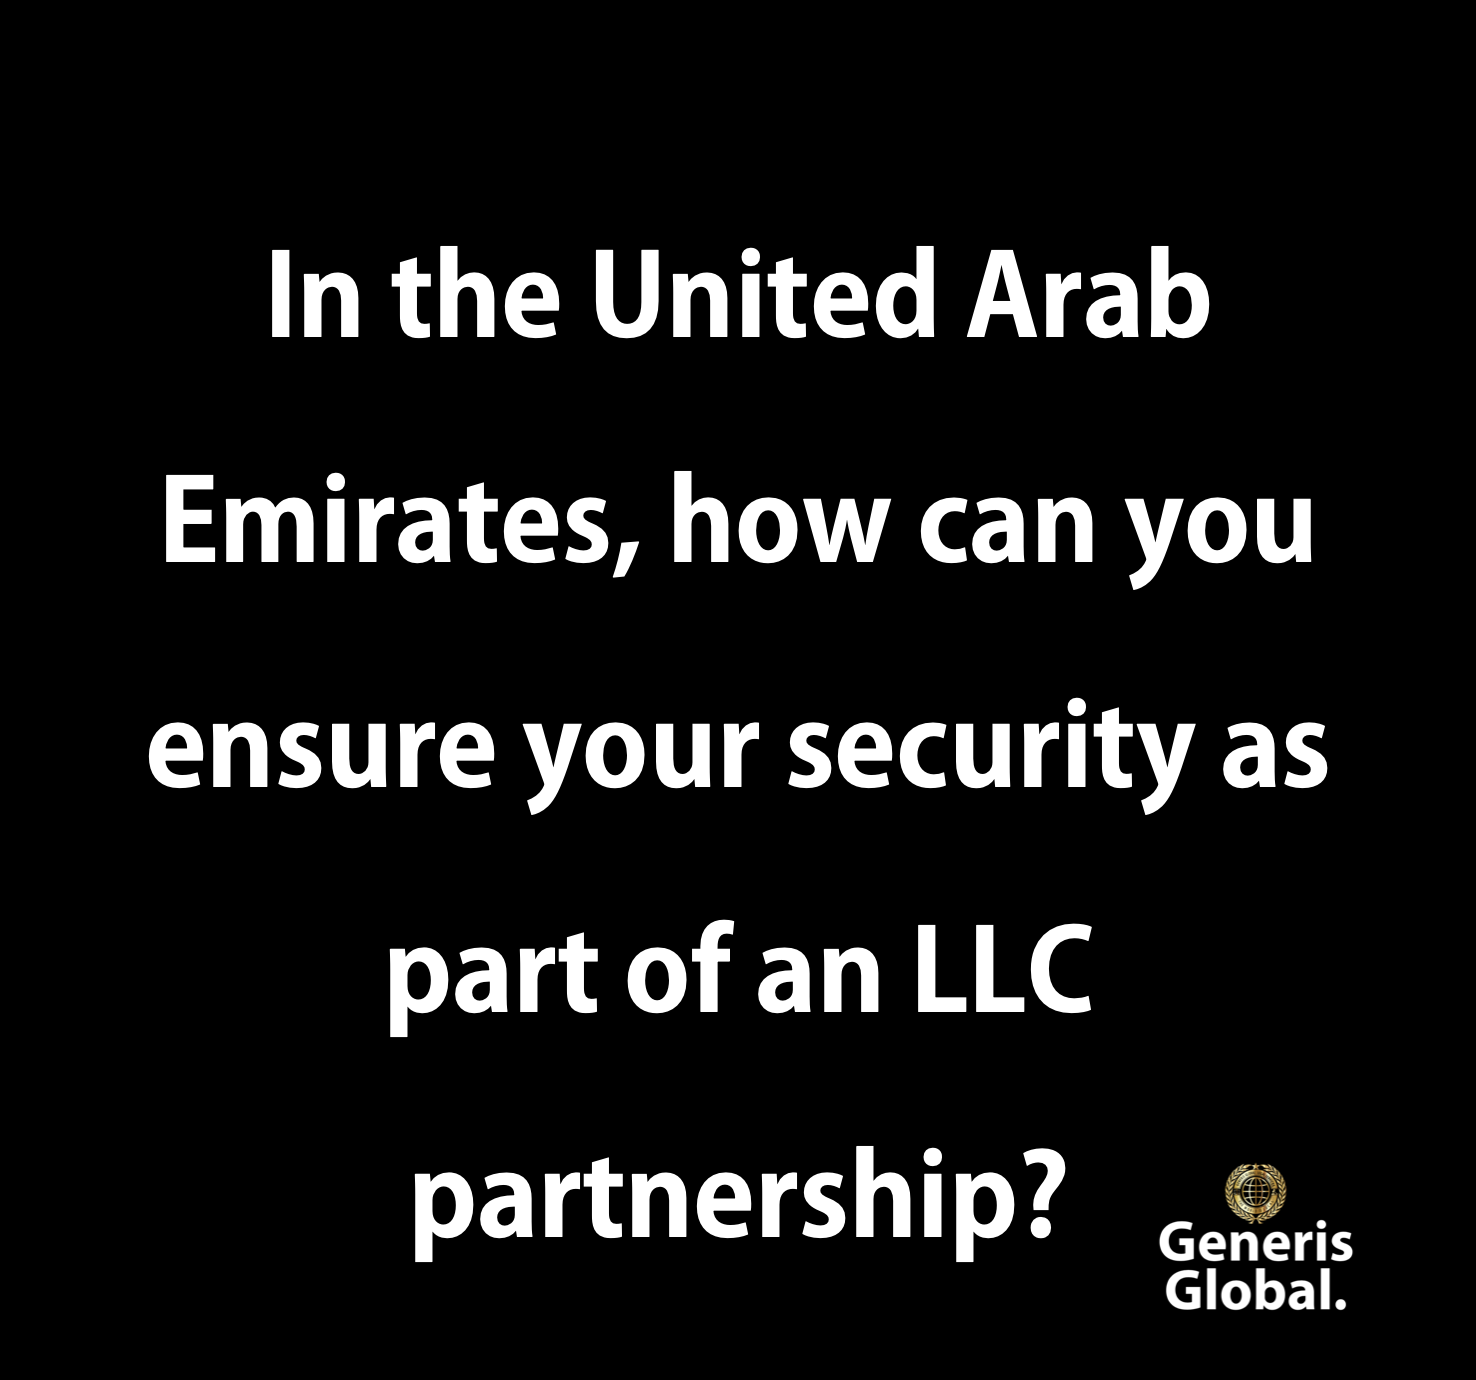 In the United Arab Emirates, how can you ensure your security as part of an LLC partnership?